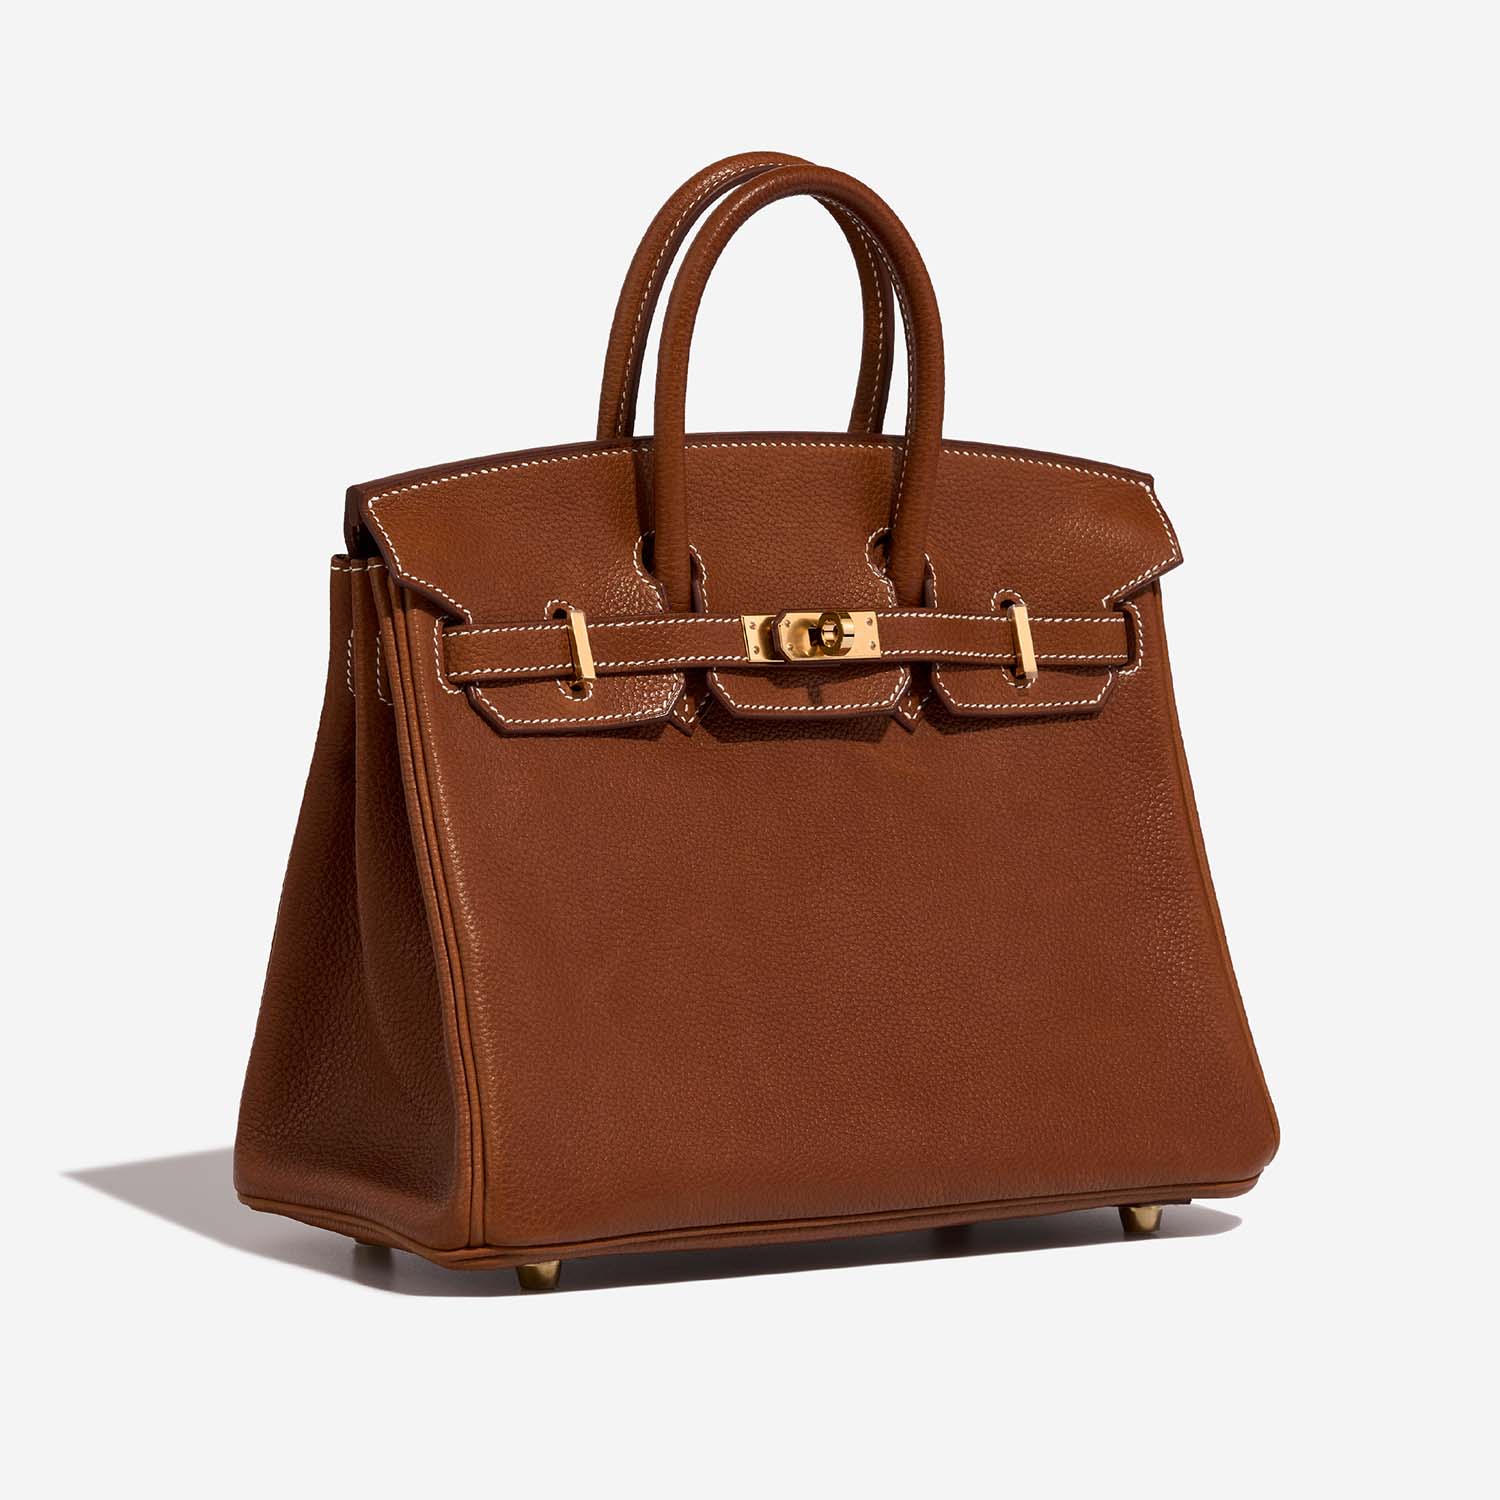 BRAND NEW HERMES KELLY 25 BARENIA FAUBOURG W/ QUALITY ISSUE *Why I